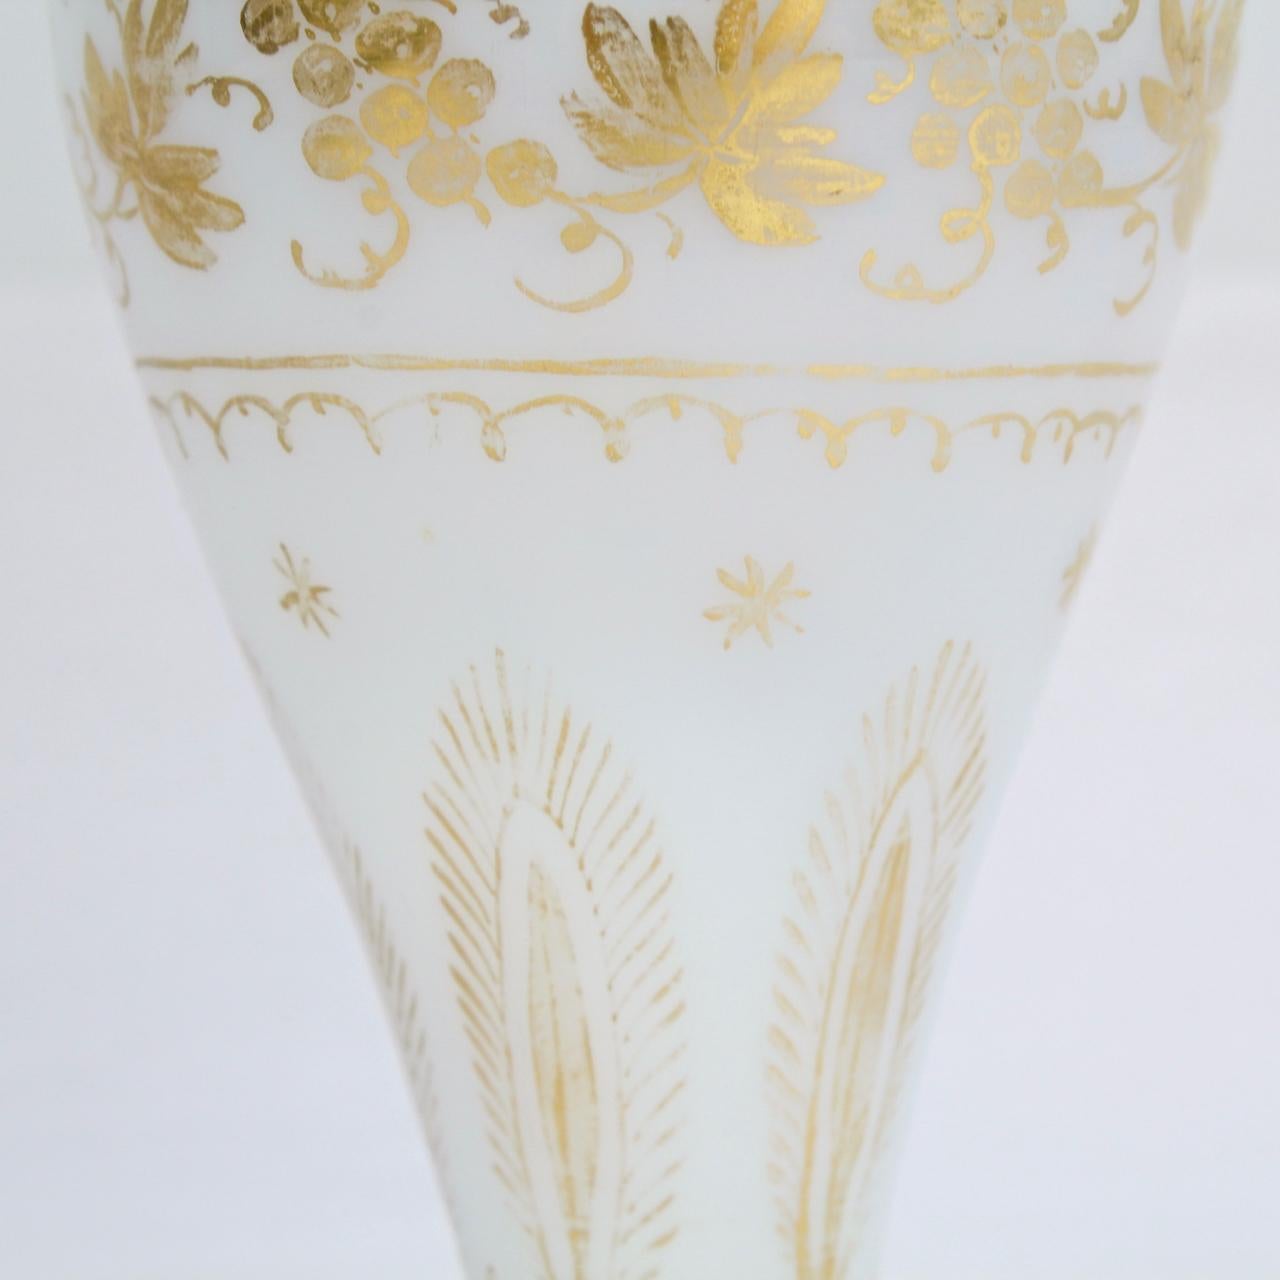 Antique 18th Century Gilt White Milk Glass Vase in the Manner of James Giles For Sale 1